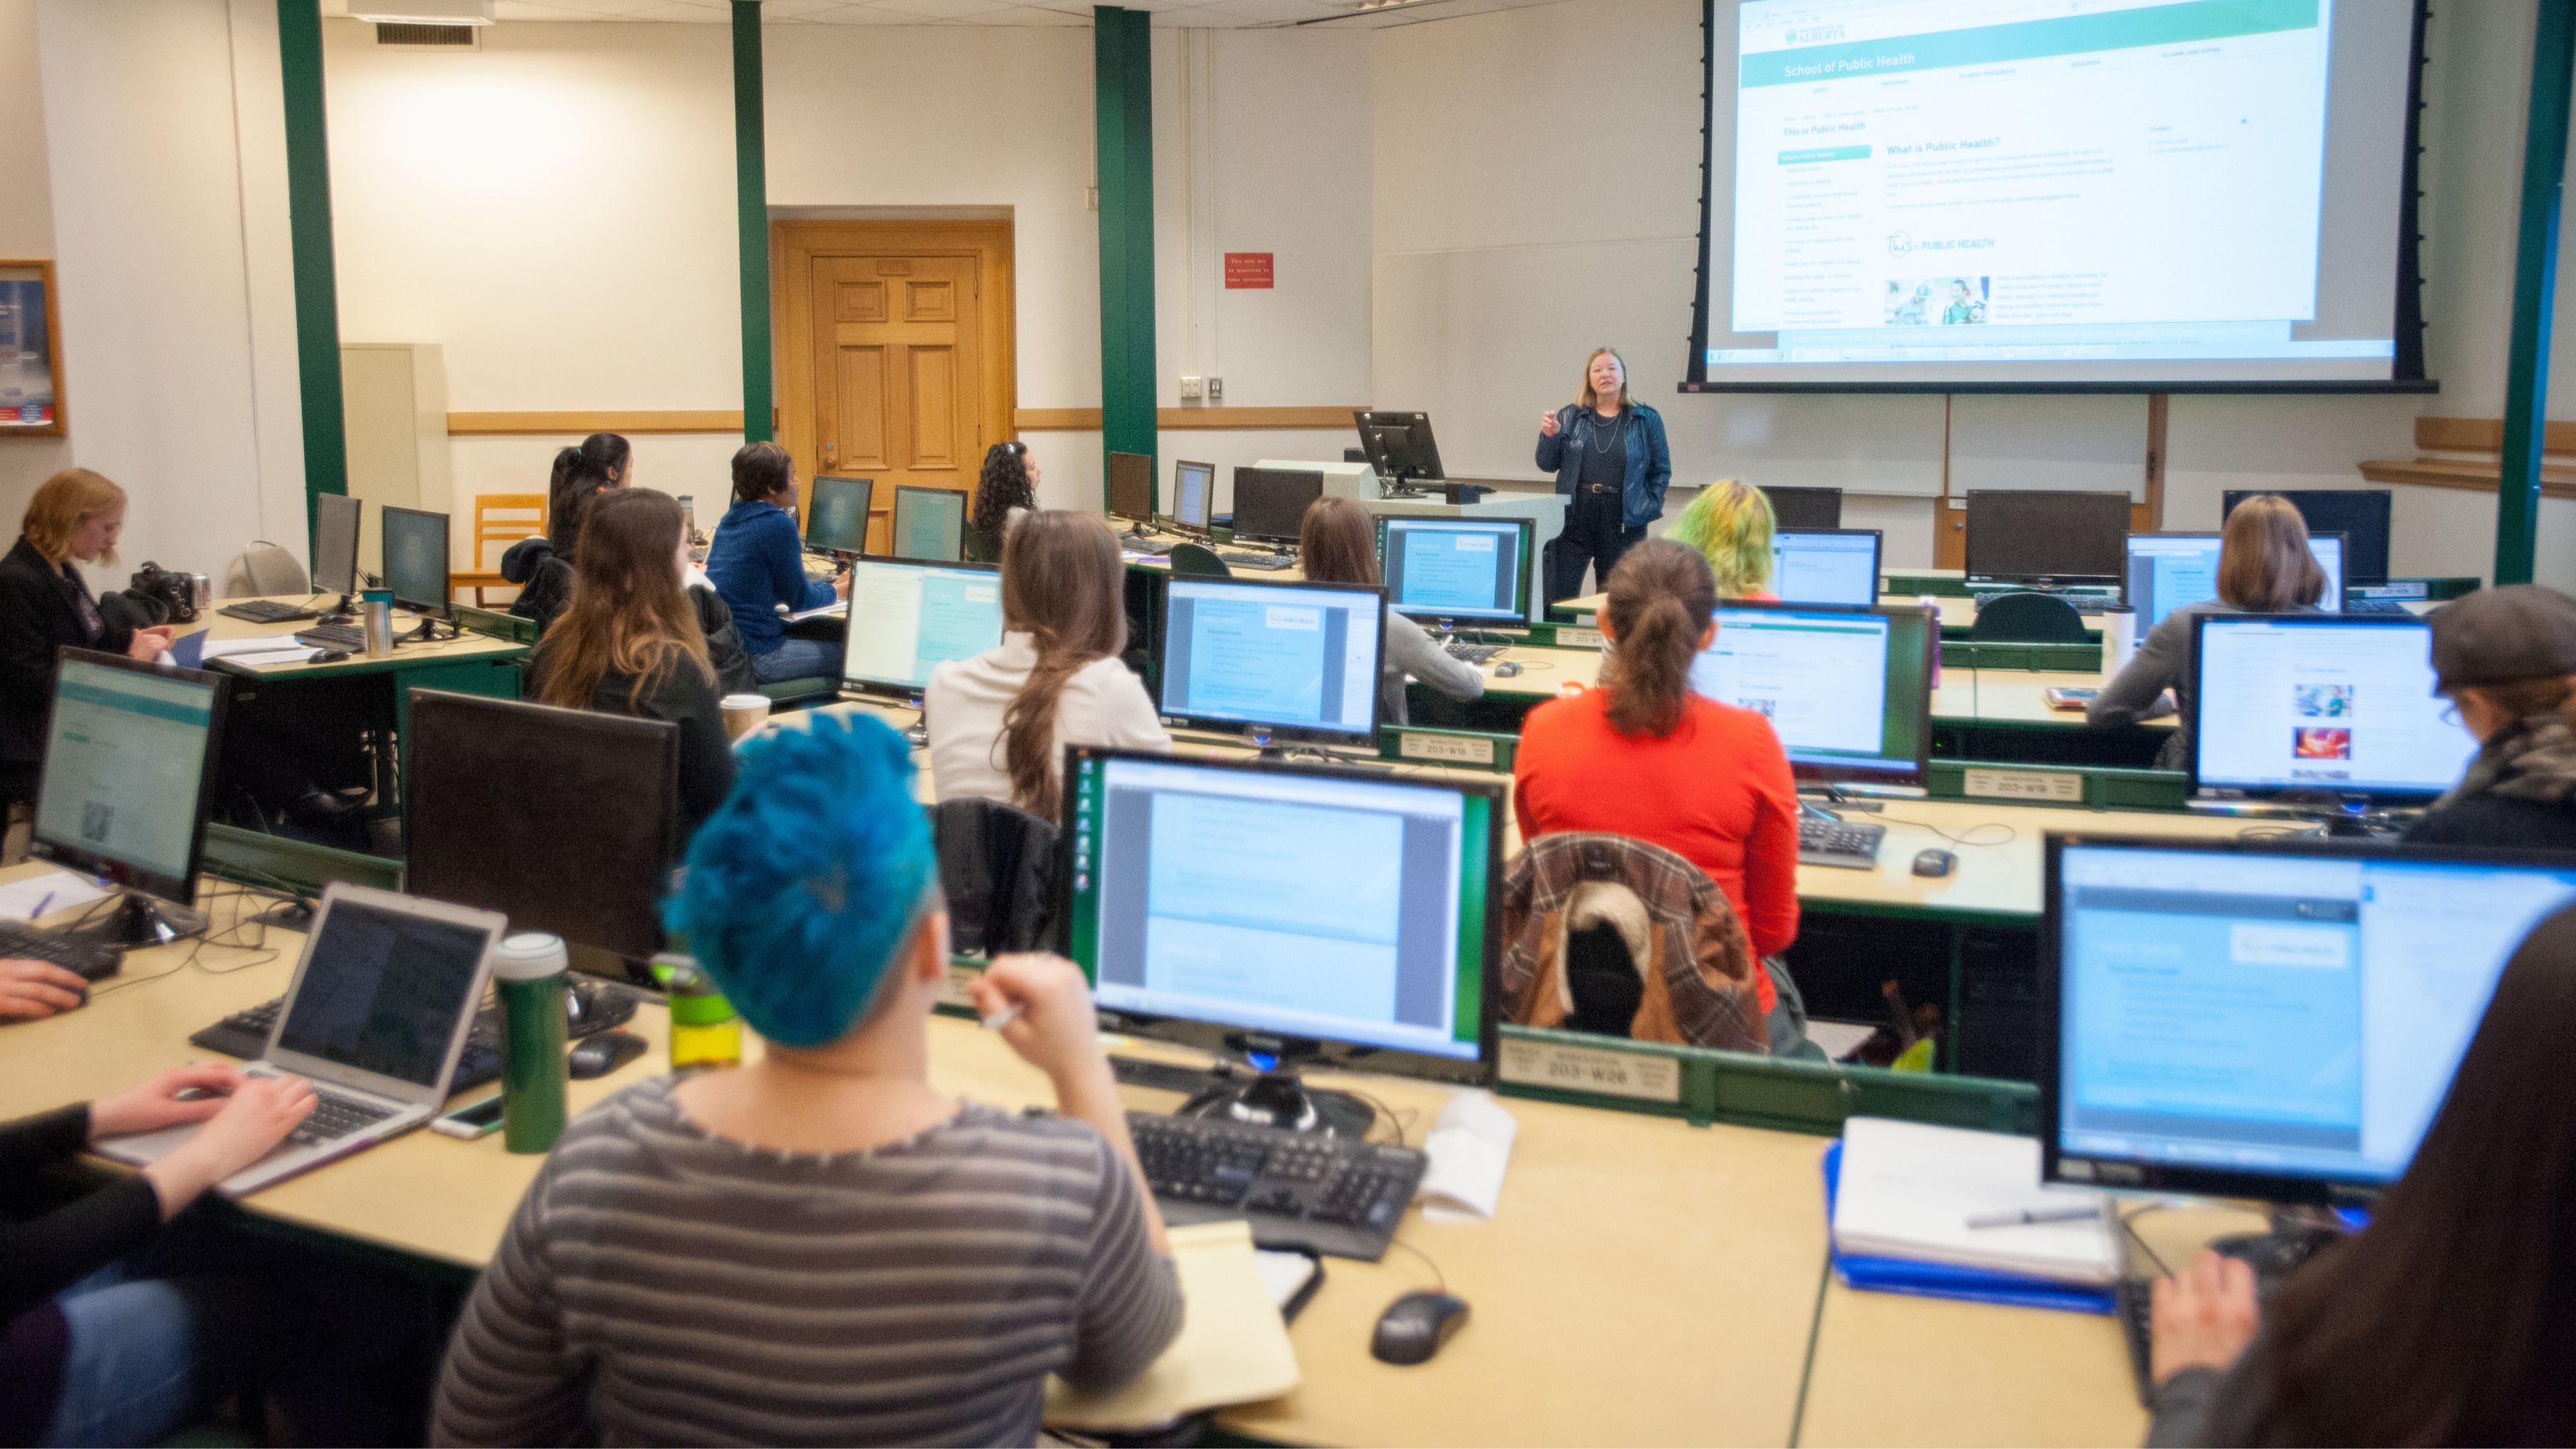 Students in digital lab, Rutherford South, University of Alberta